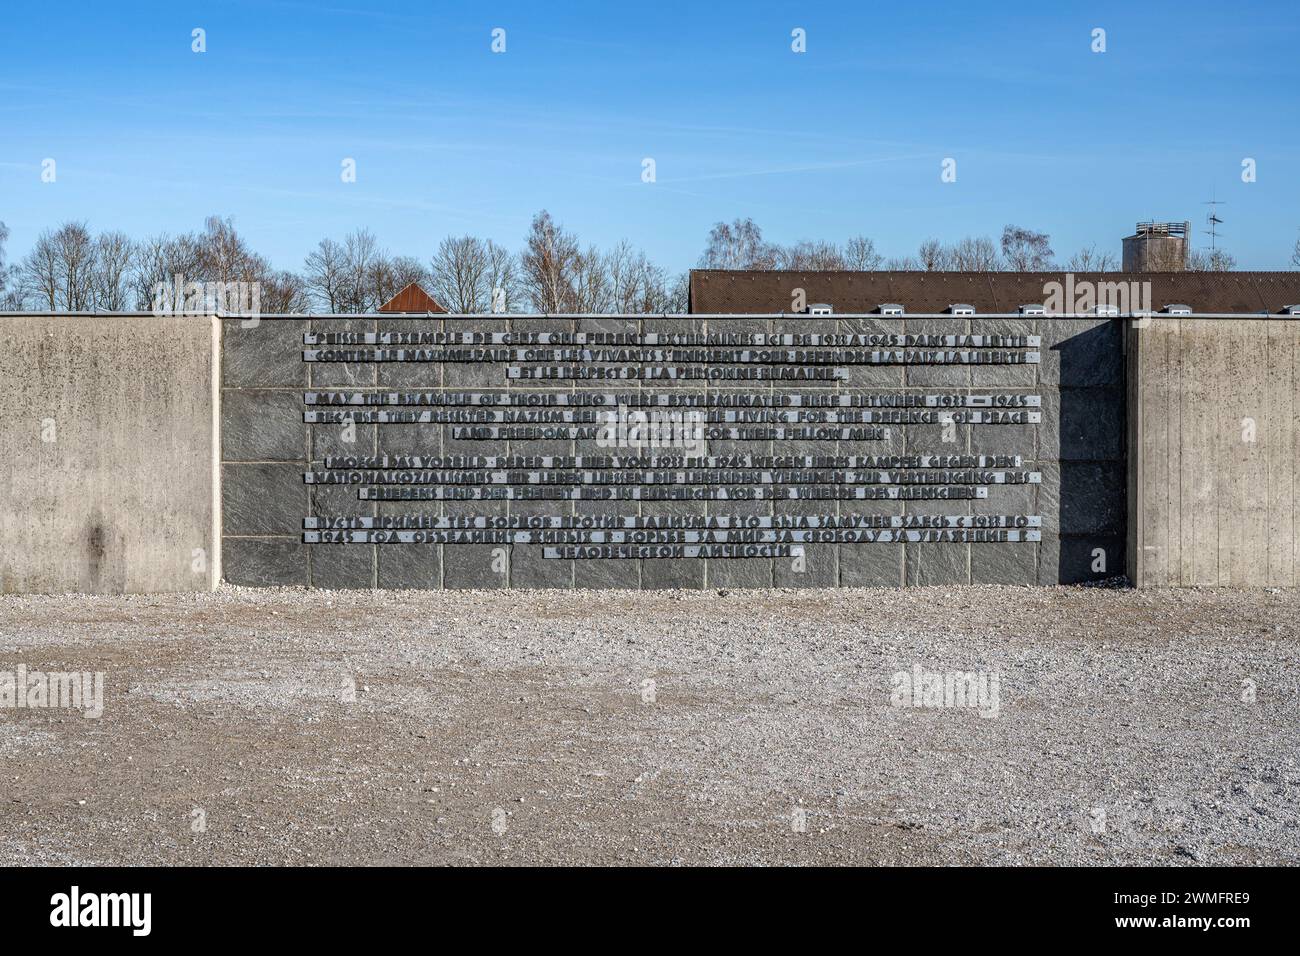 Dachau Concentration Camp Buildings in Germany. Stock Photo